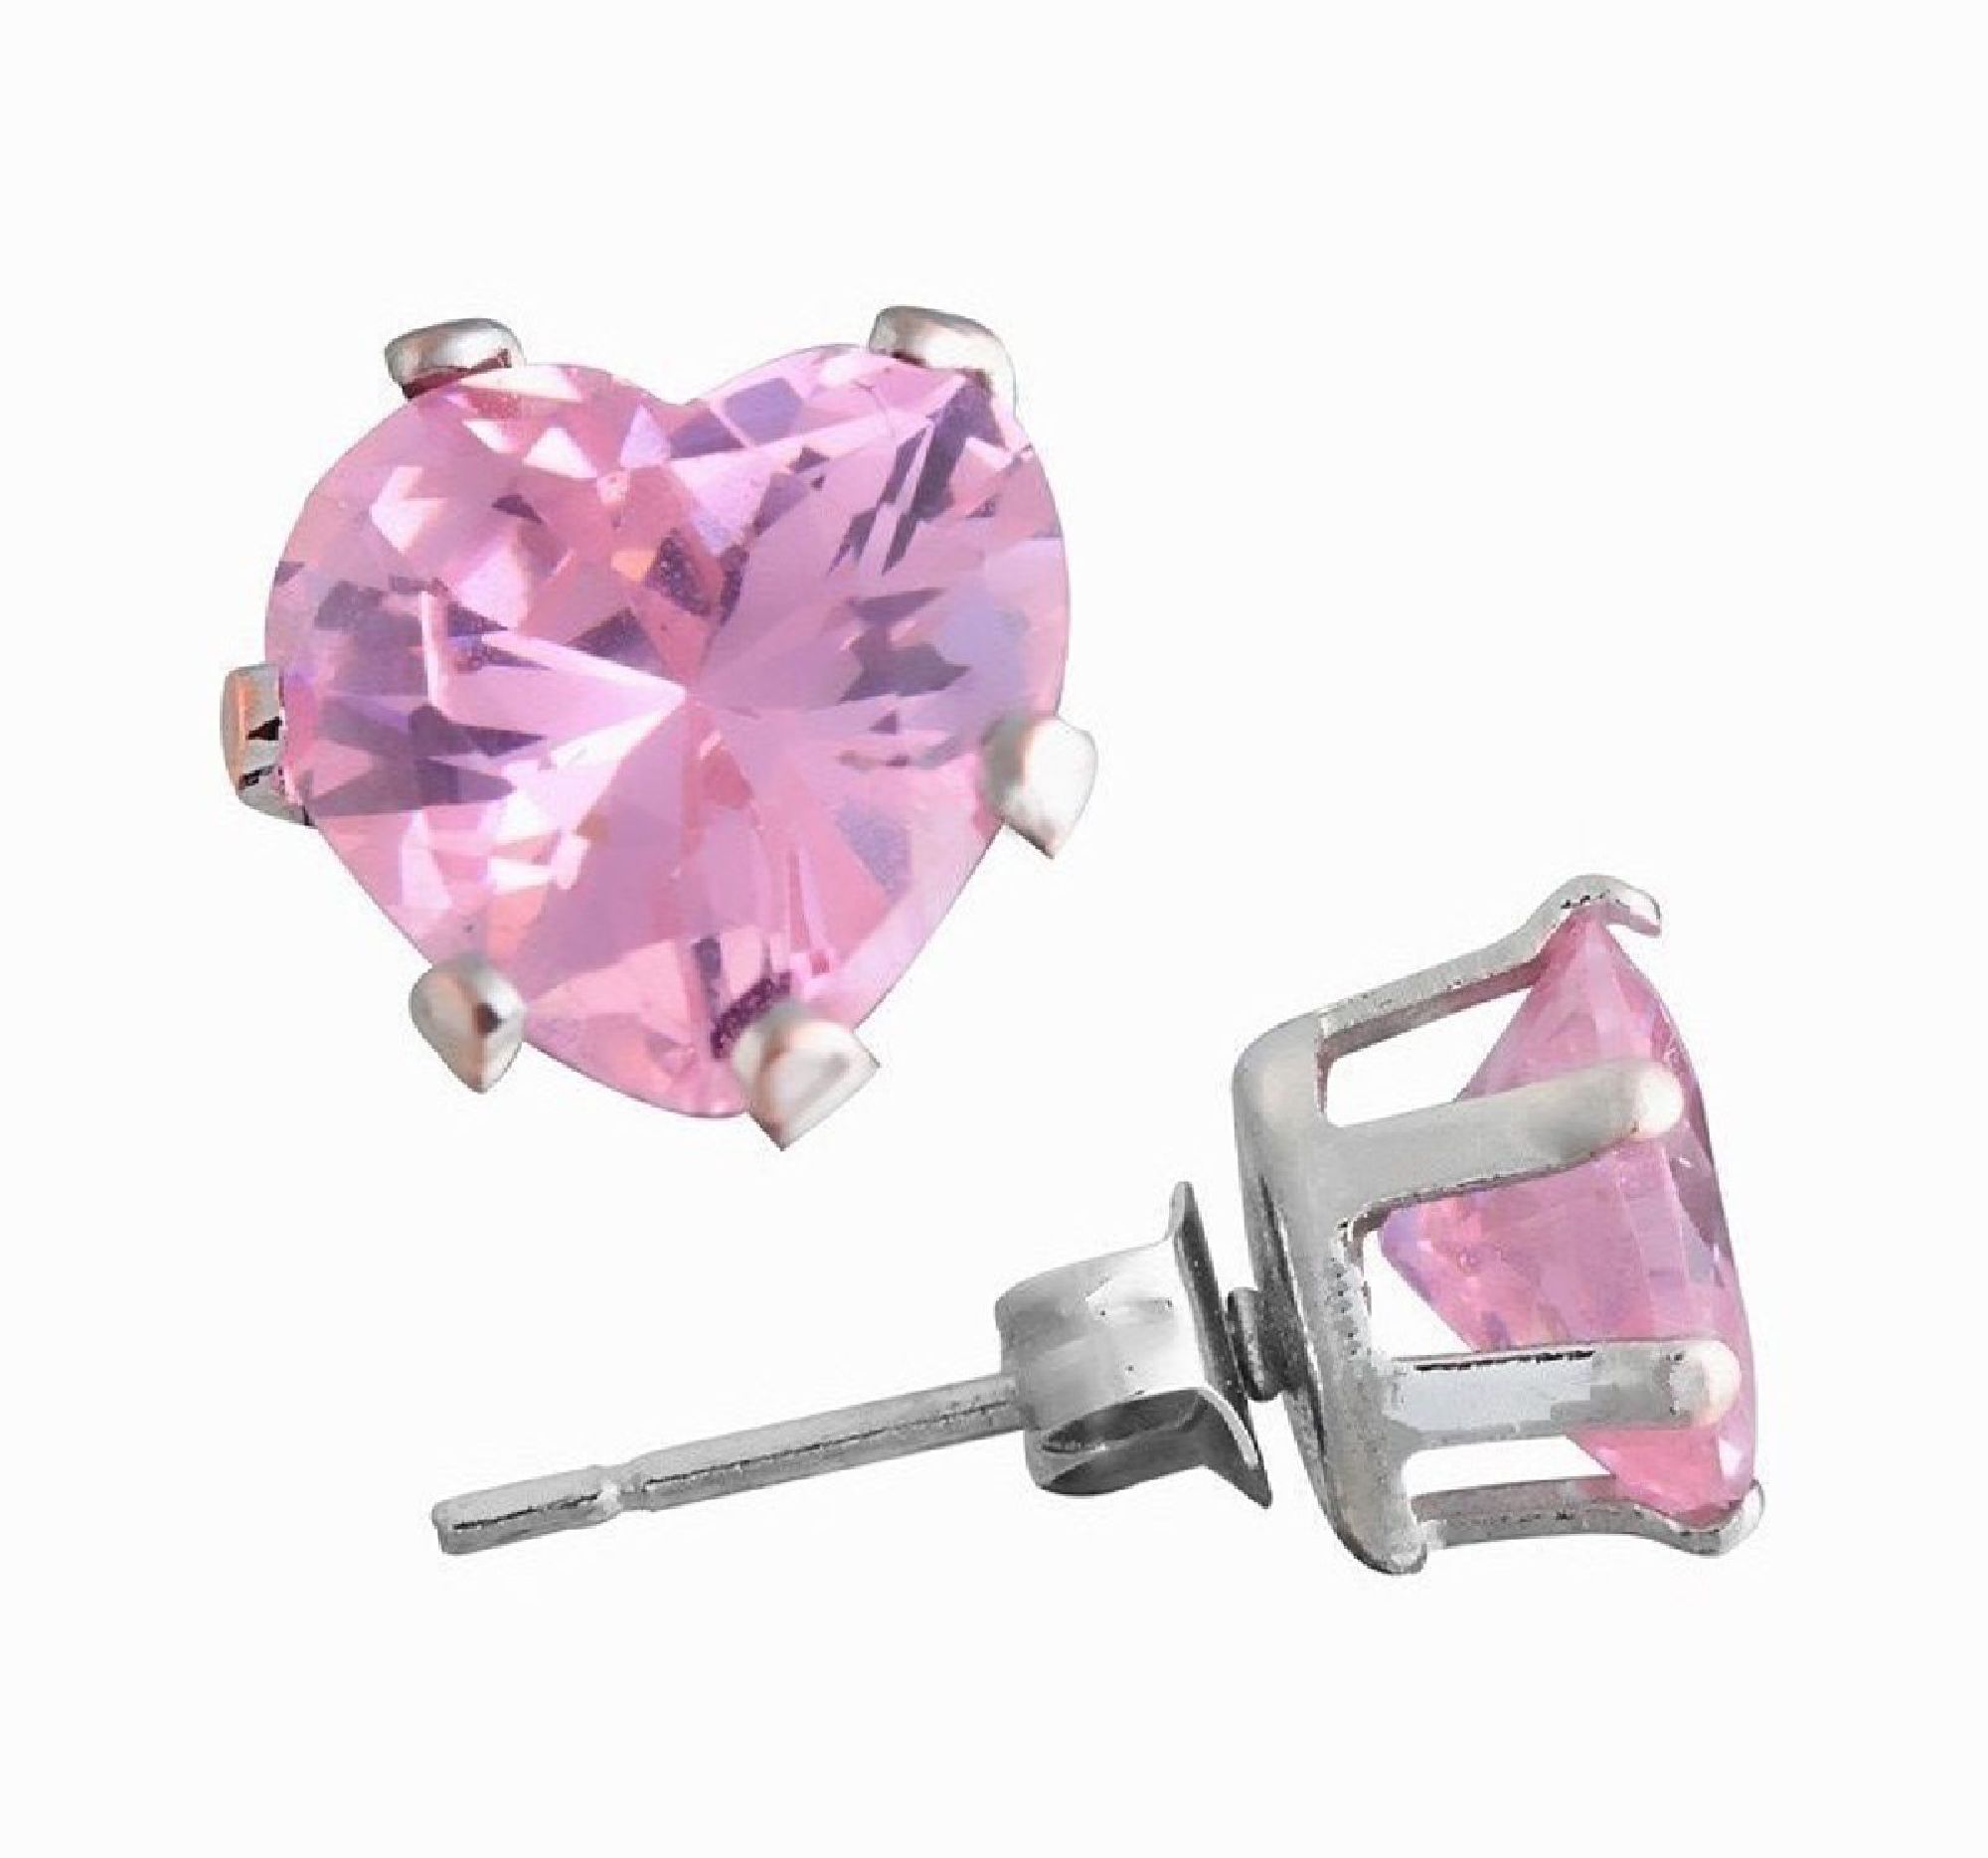 3 Carat Heart Shape Pink Diamond manmade Stud Earrings for Woman in Platinum over Sterling Silver Designed in France